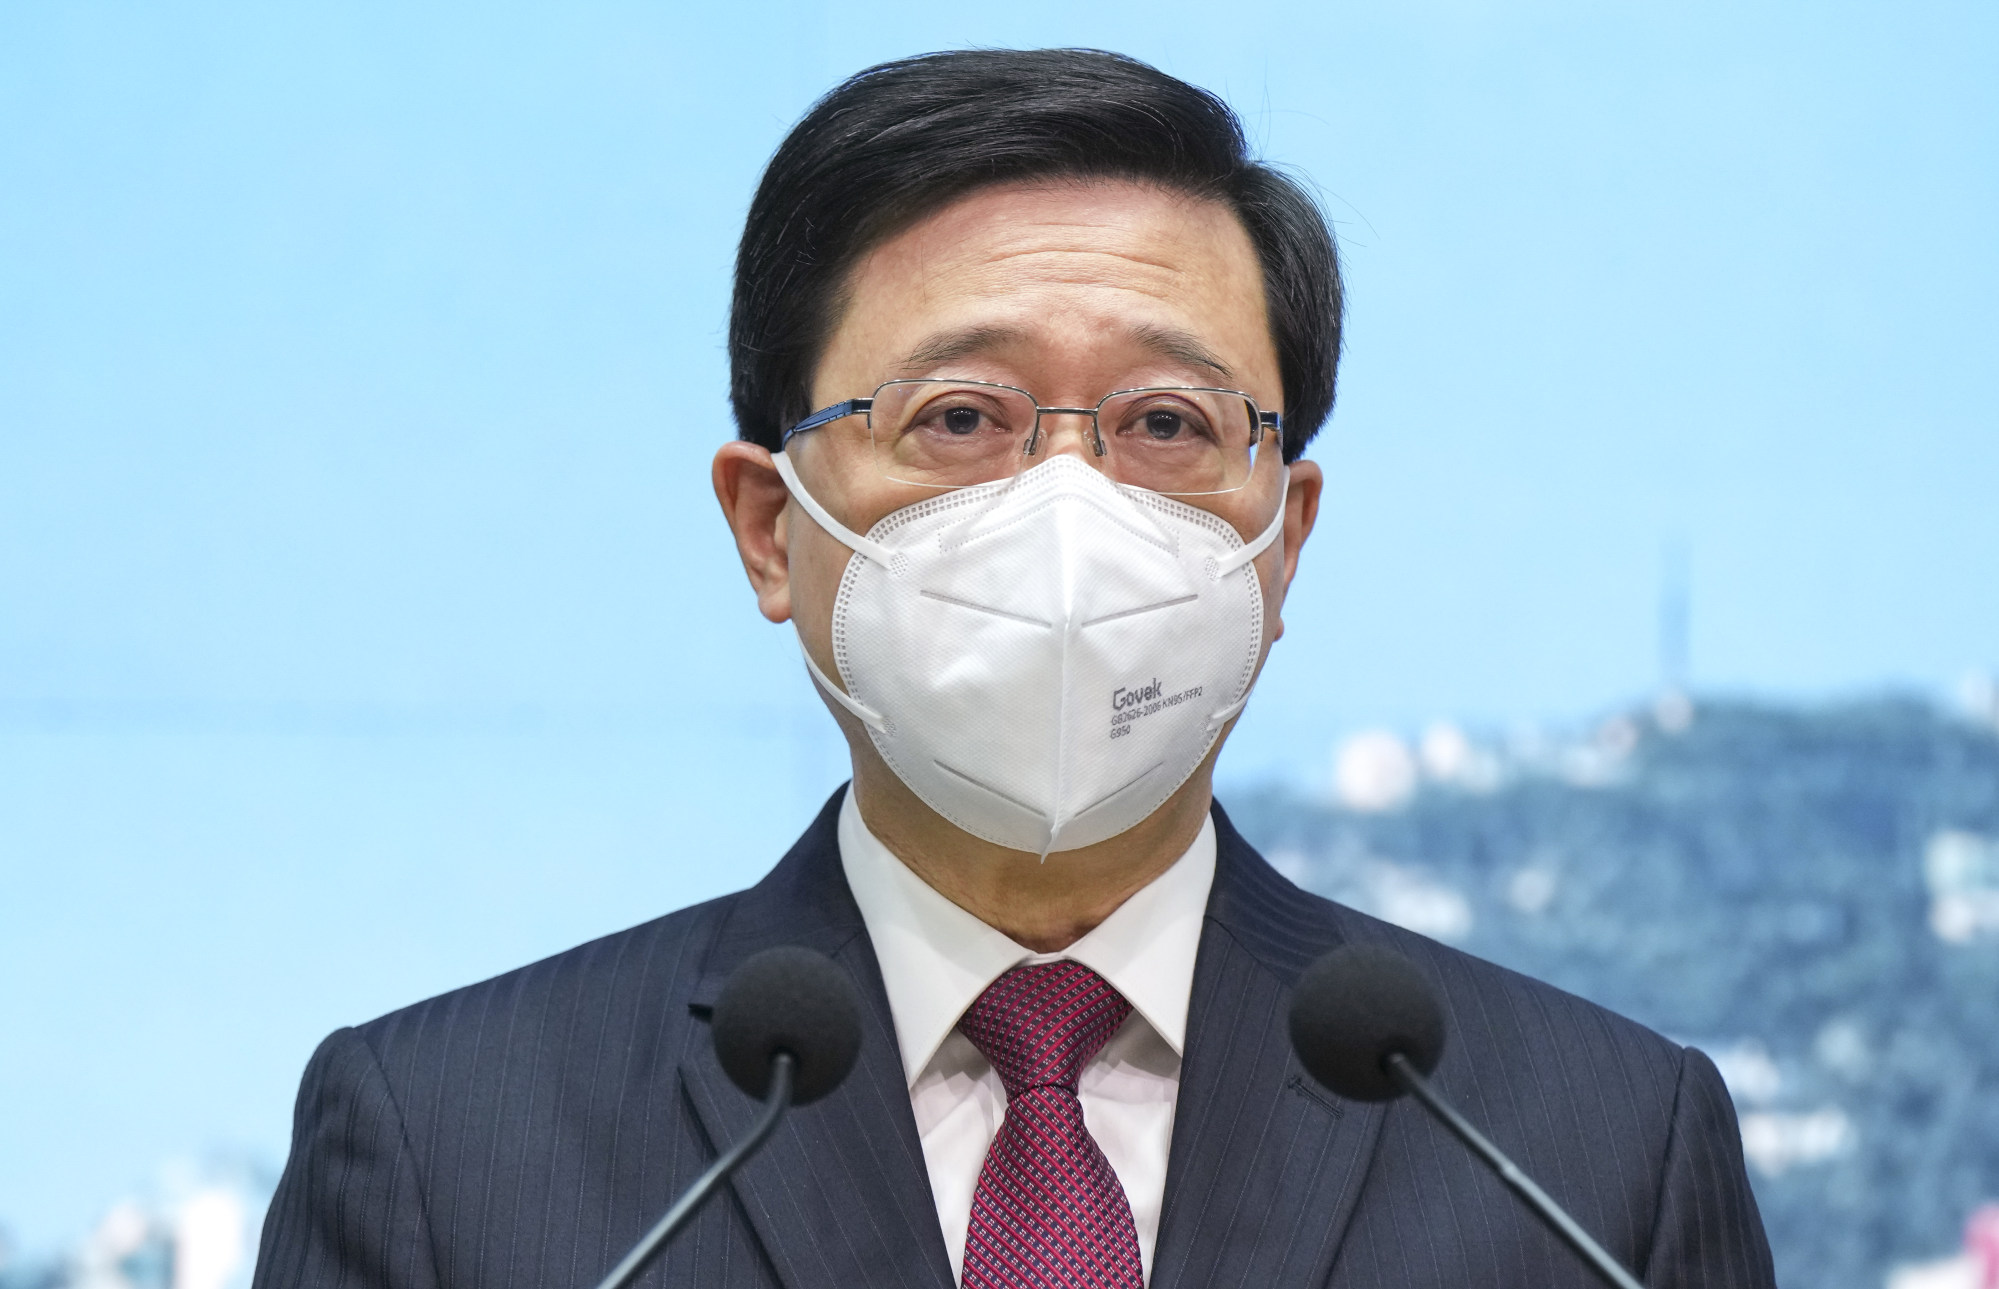 hong kong chief executive warns public to beware after his image and fake interview used to entice people to suspicious online cryptocurrency site